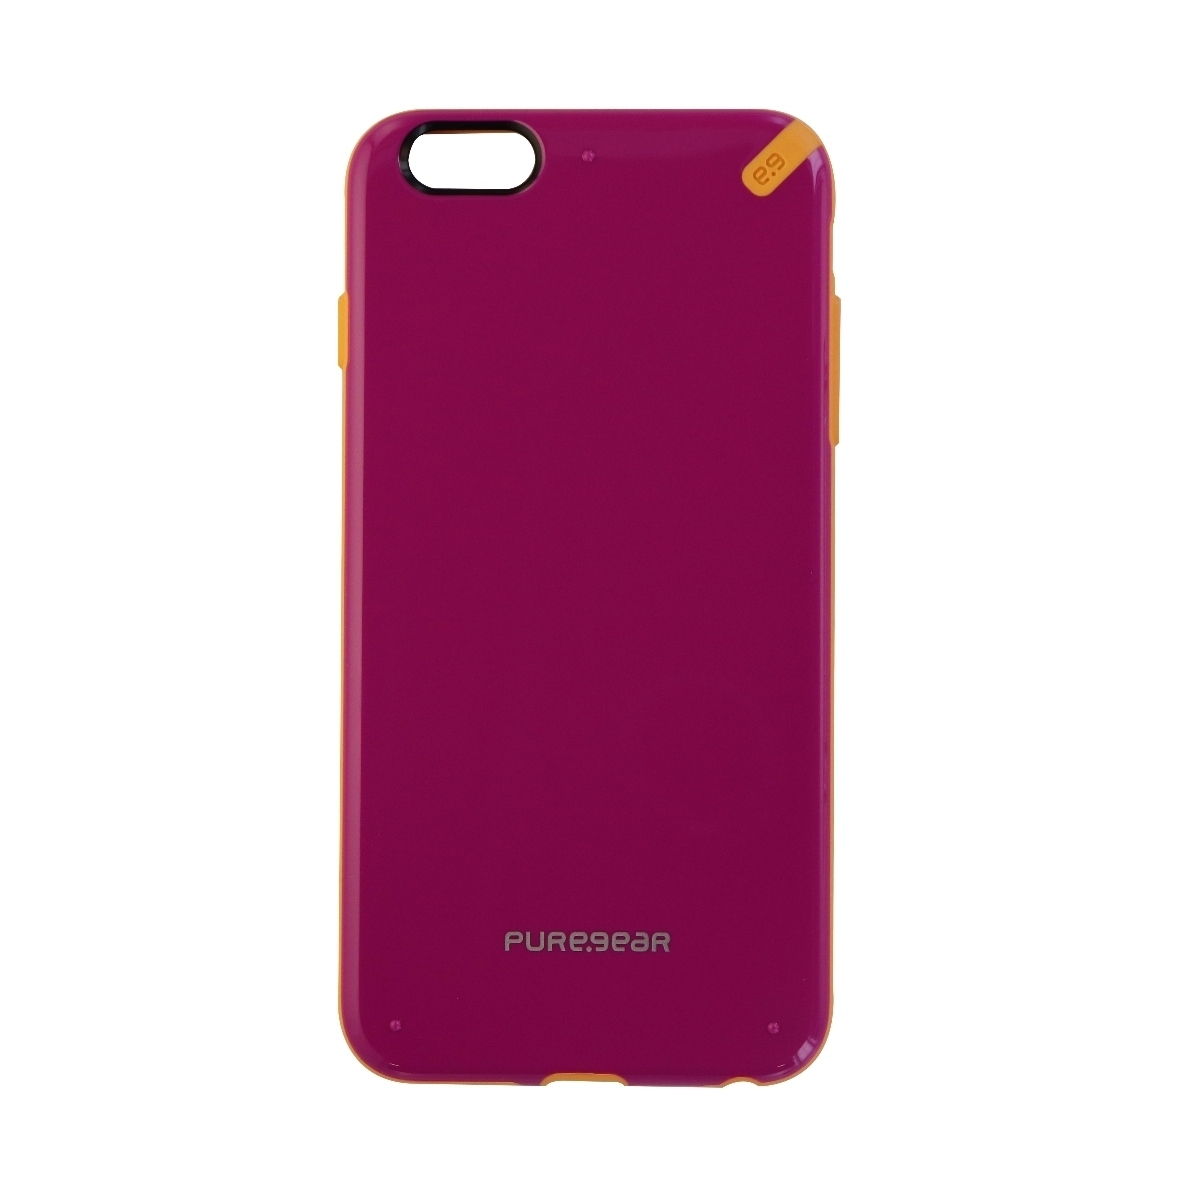 PureGear Slim Shell Hard Case Cover For IPhone 6s Plus 6 Plus - Sunset Pink